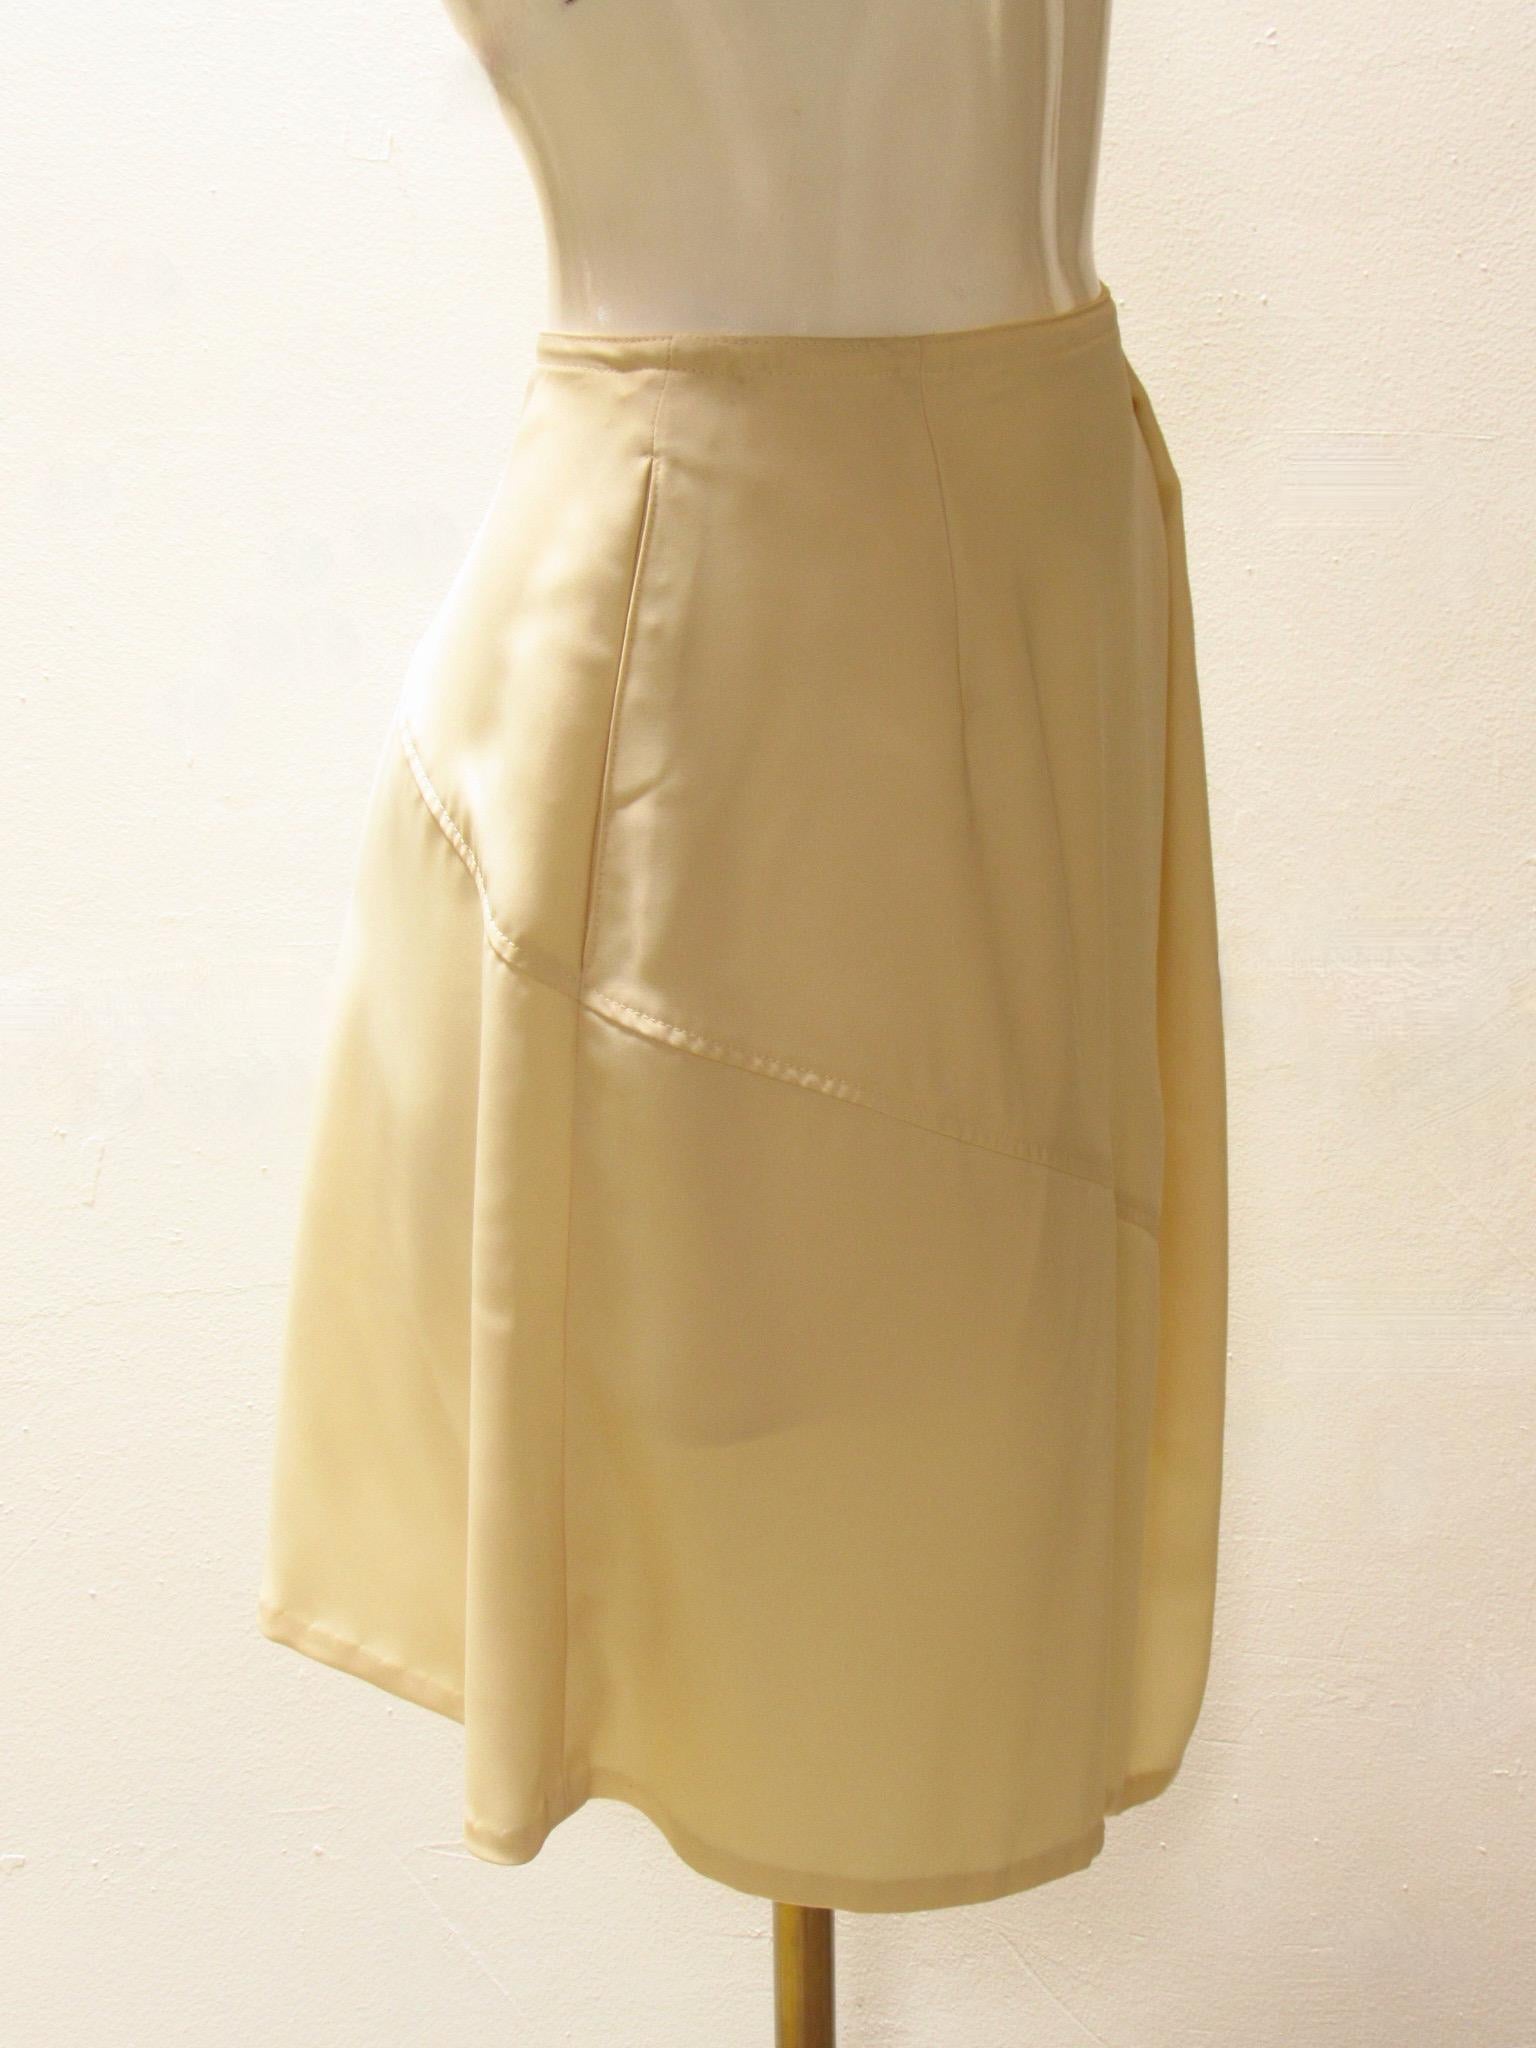 Matsuda Vintage Ivory Asymmetrical Skirt In New Condition For Sale In Laguna Beach, CA